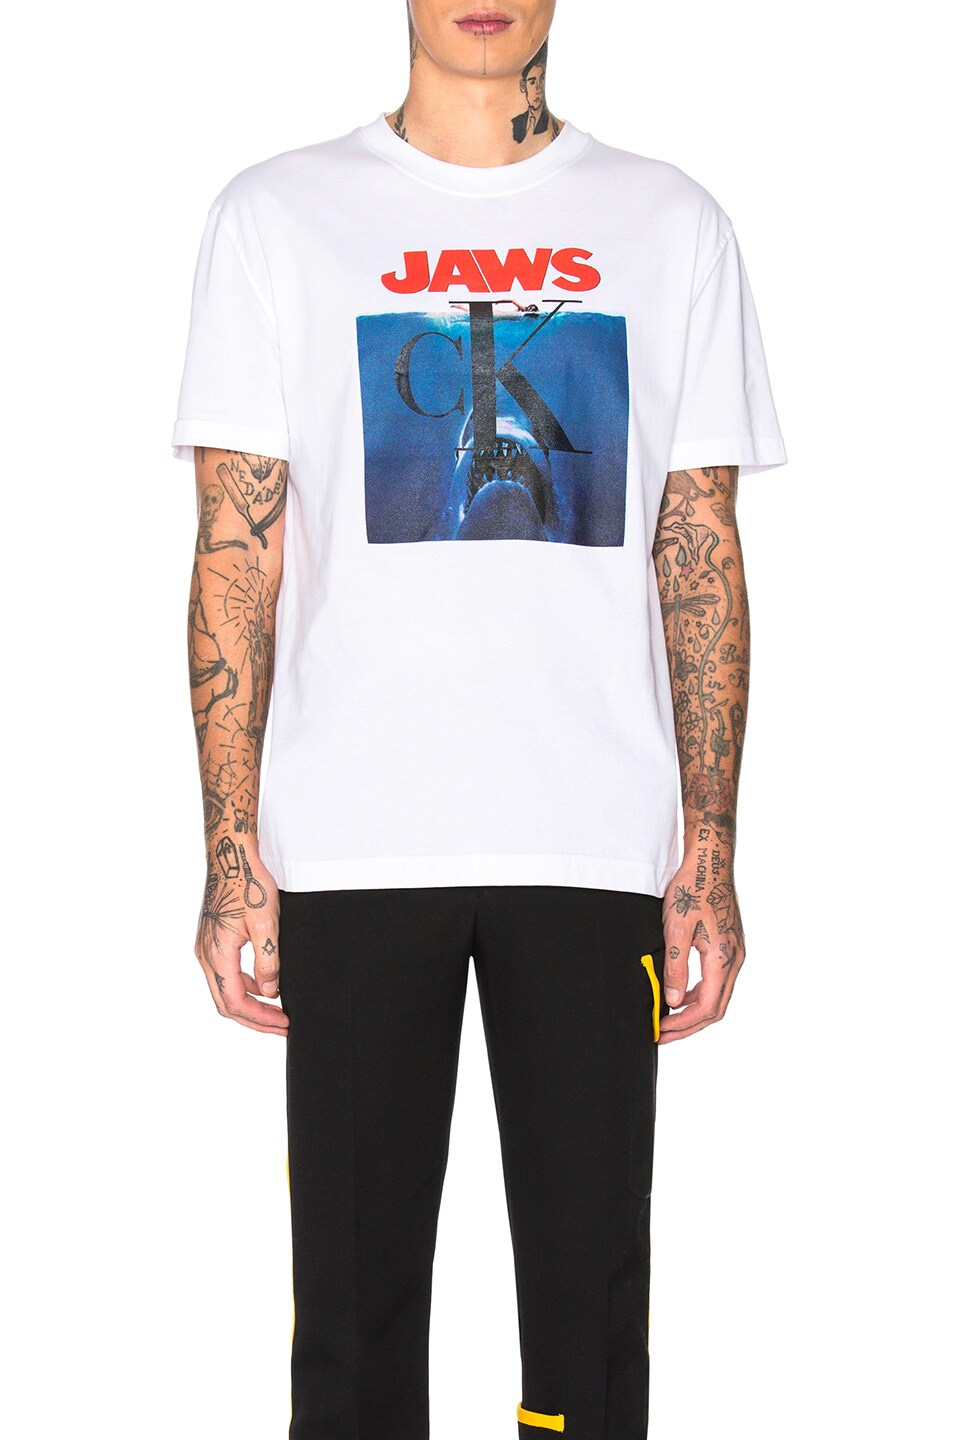 CALVIN KLEIN 205W39NYC Jaws 1975 Graphic Tee,CNYF-MS44